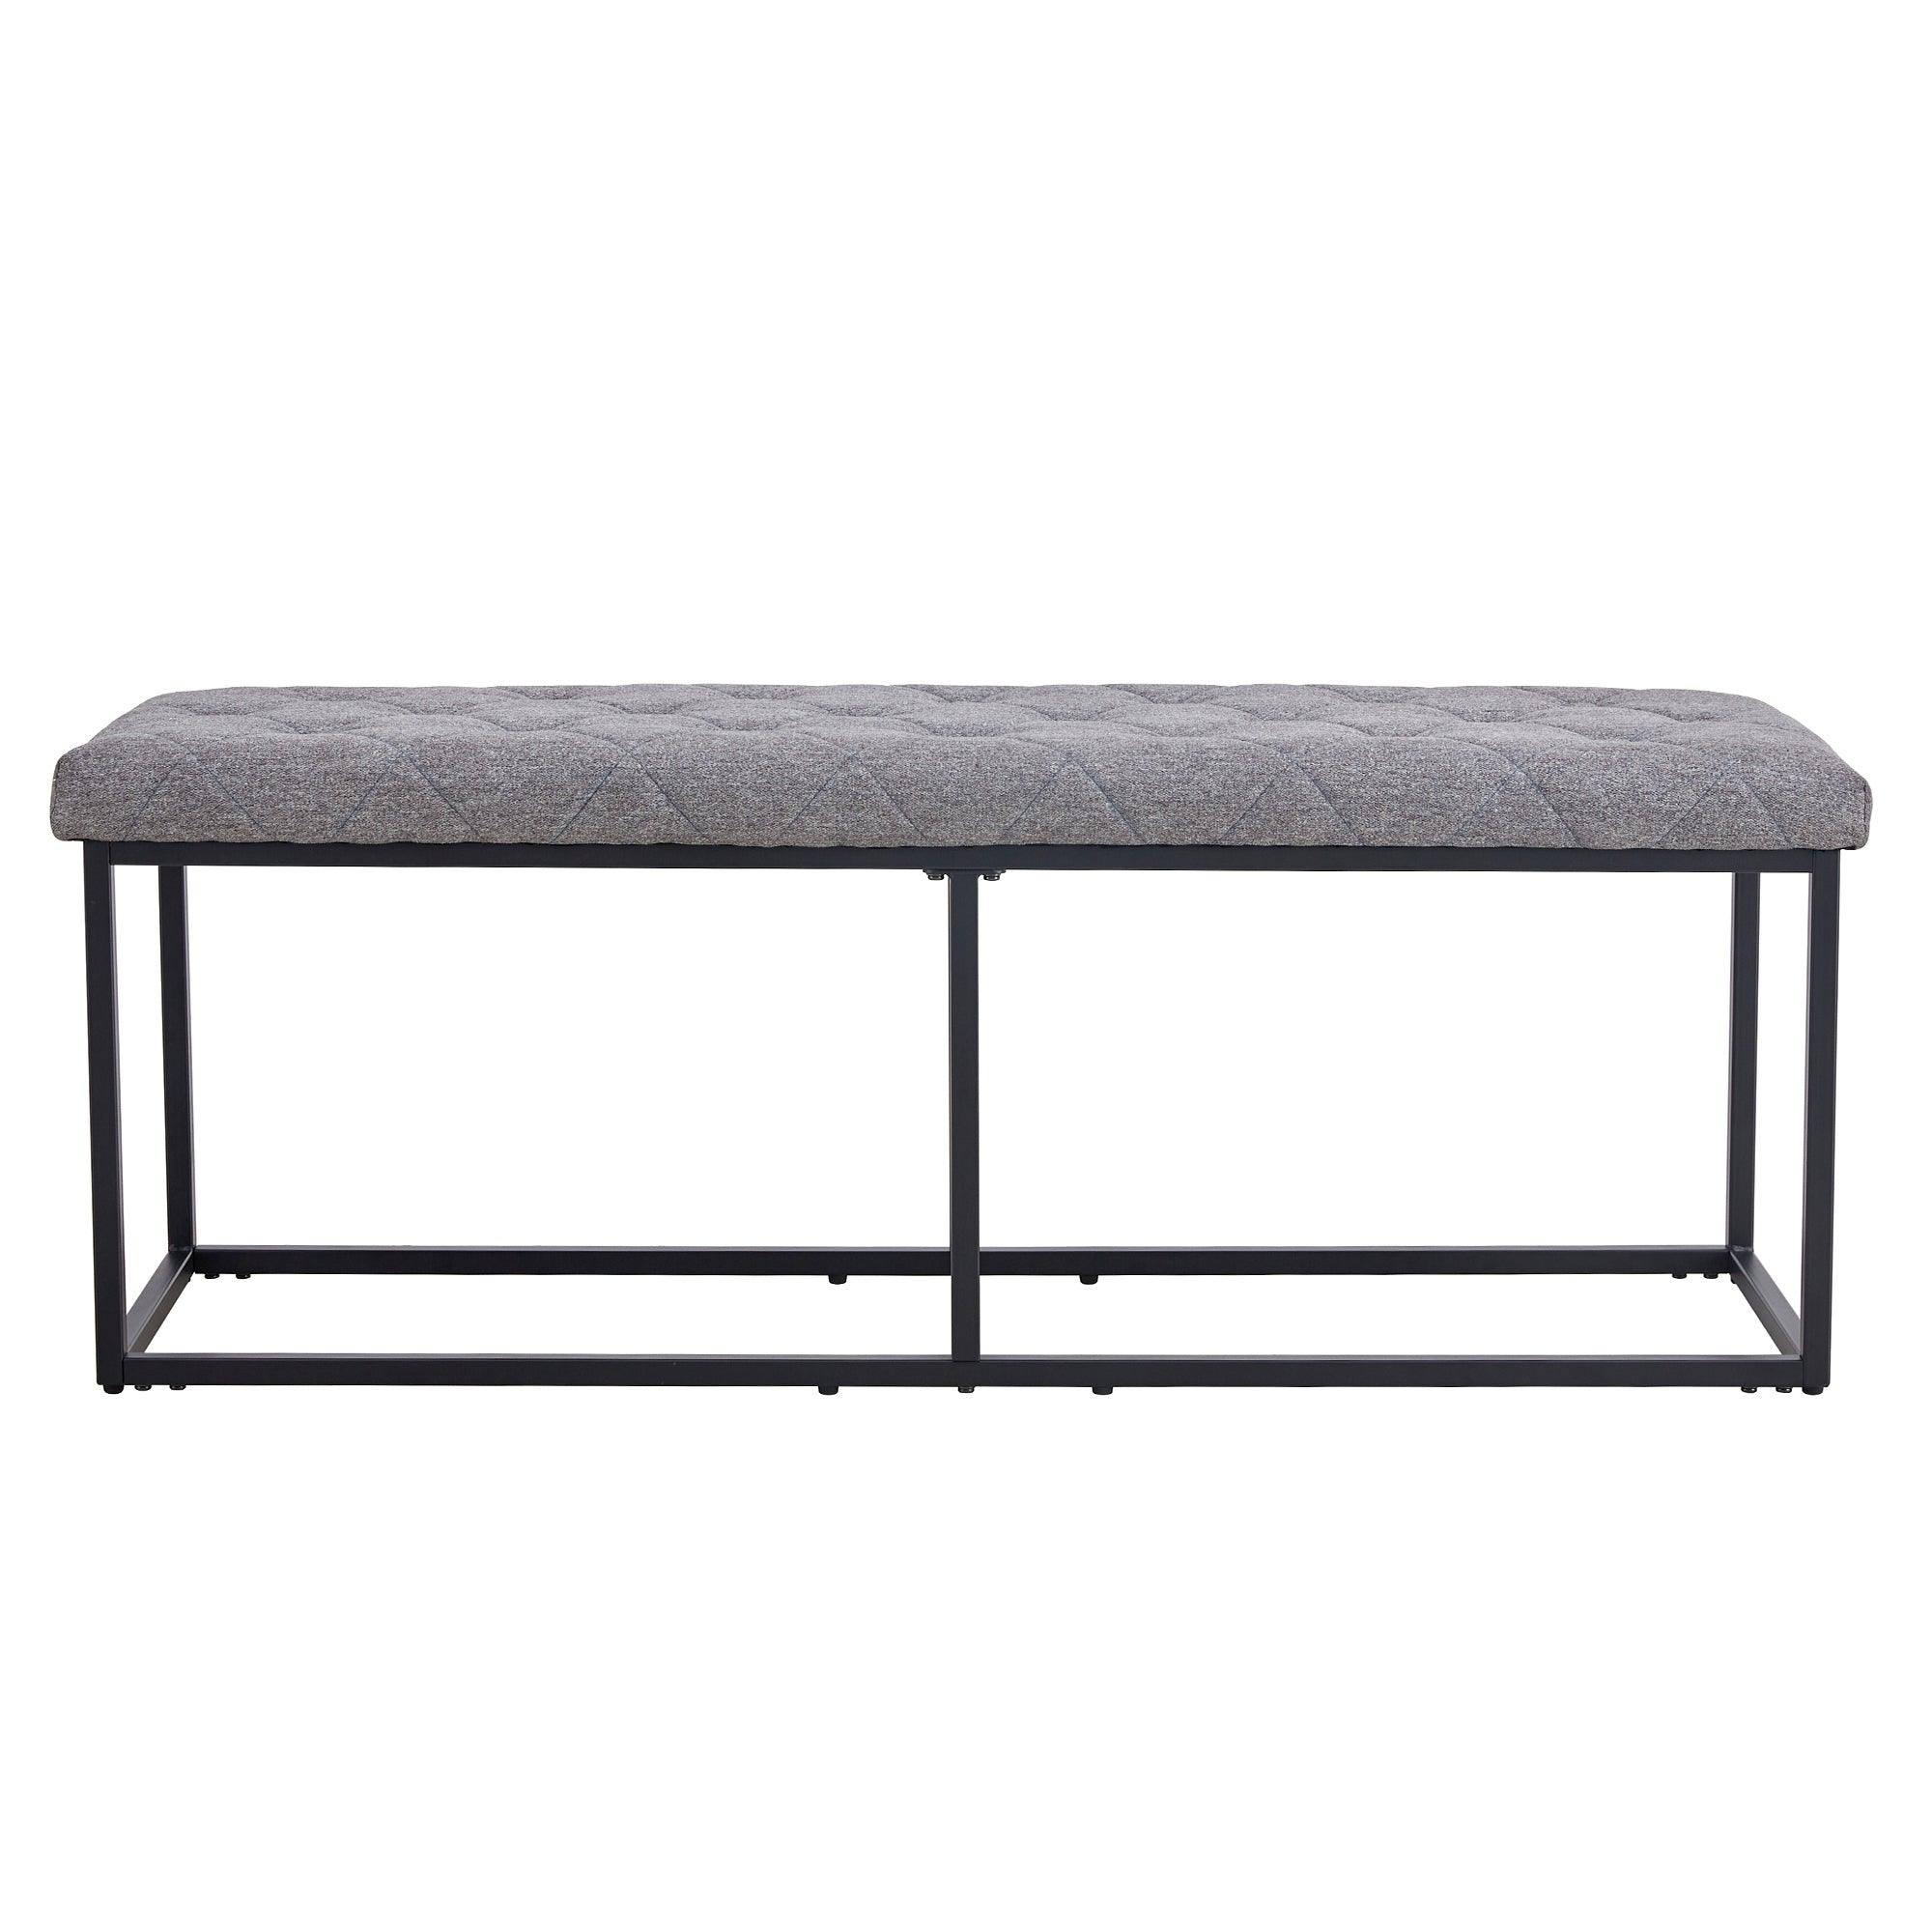 🆓🚛 Tufted Extra-Long Entryway Bench, 51" Bedroom Benches Upholstered Dining Benches, Fabric End Of Bed Bench for Bedroom Dining Room Living Room Entryway, Gray